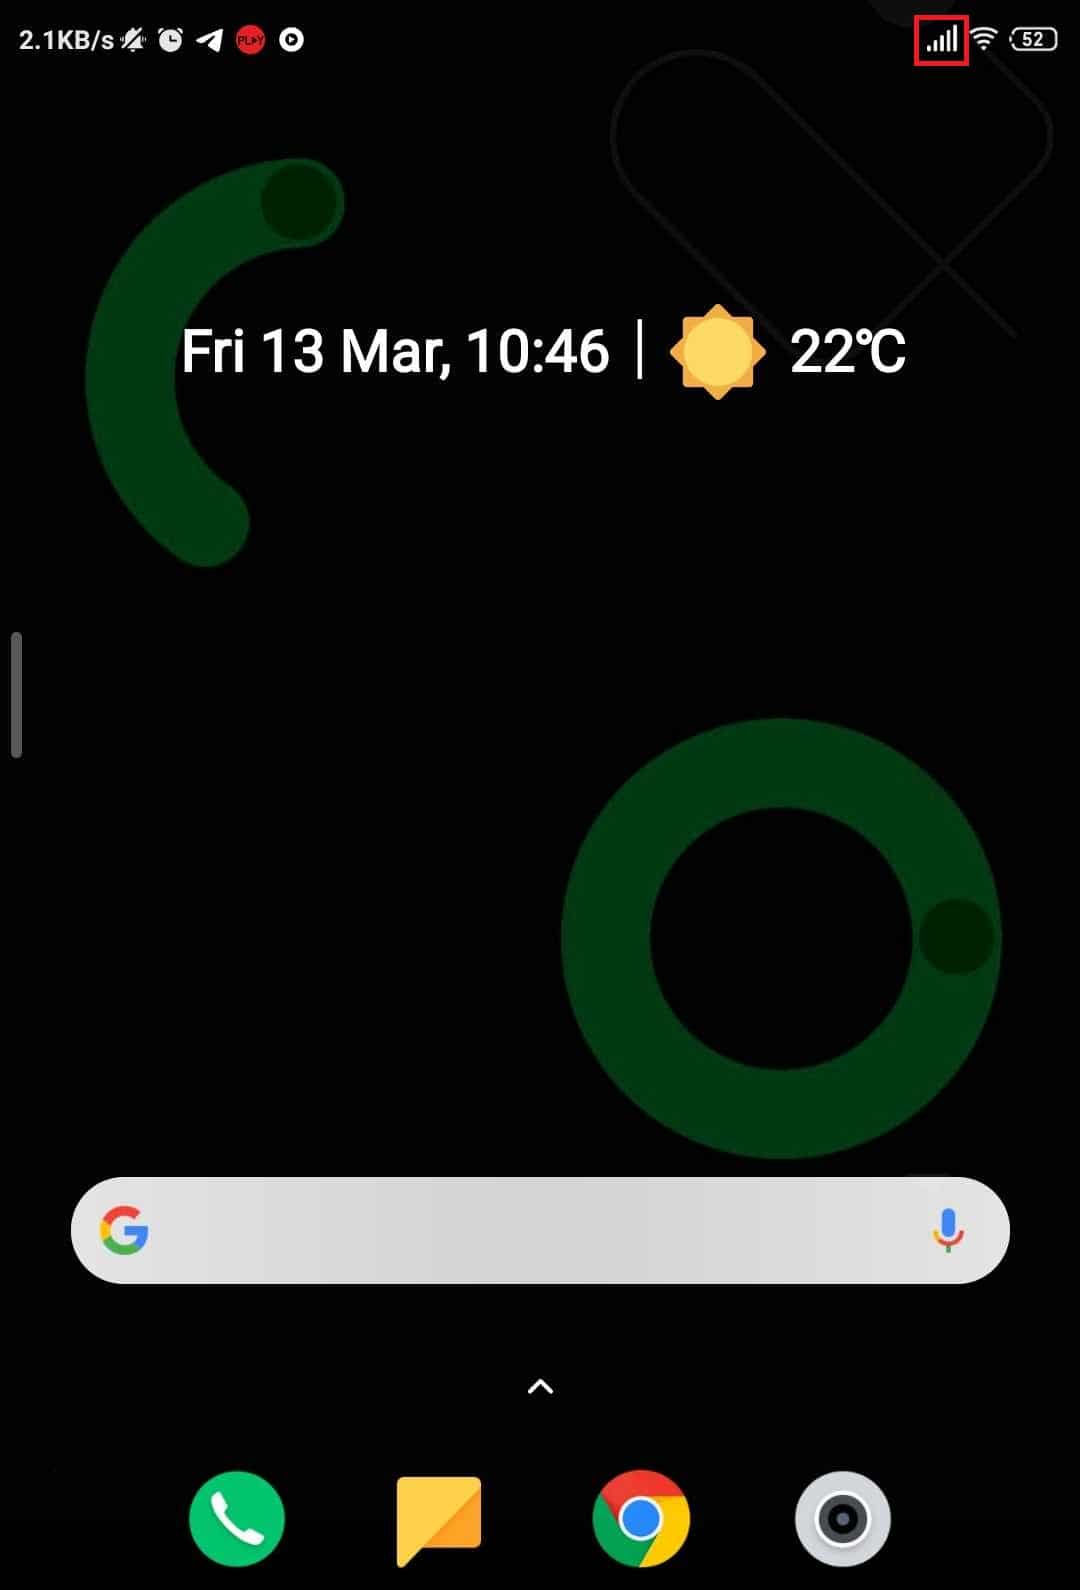 Check the signal strength. It is indicated by the bars in the notification bar.